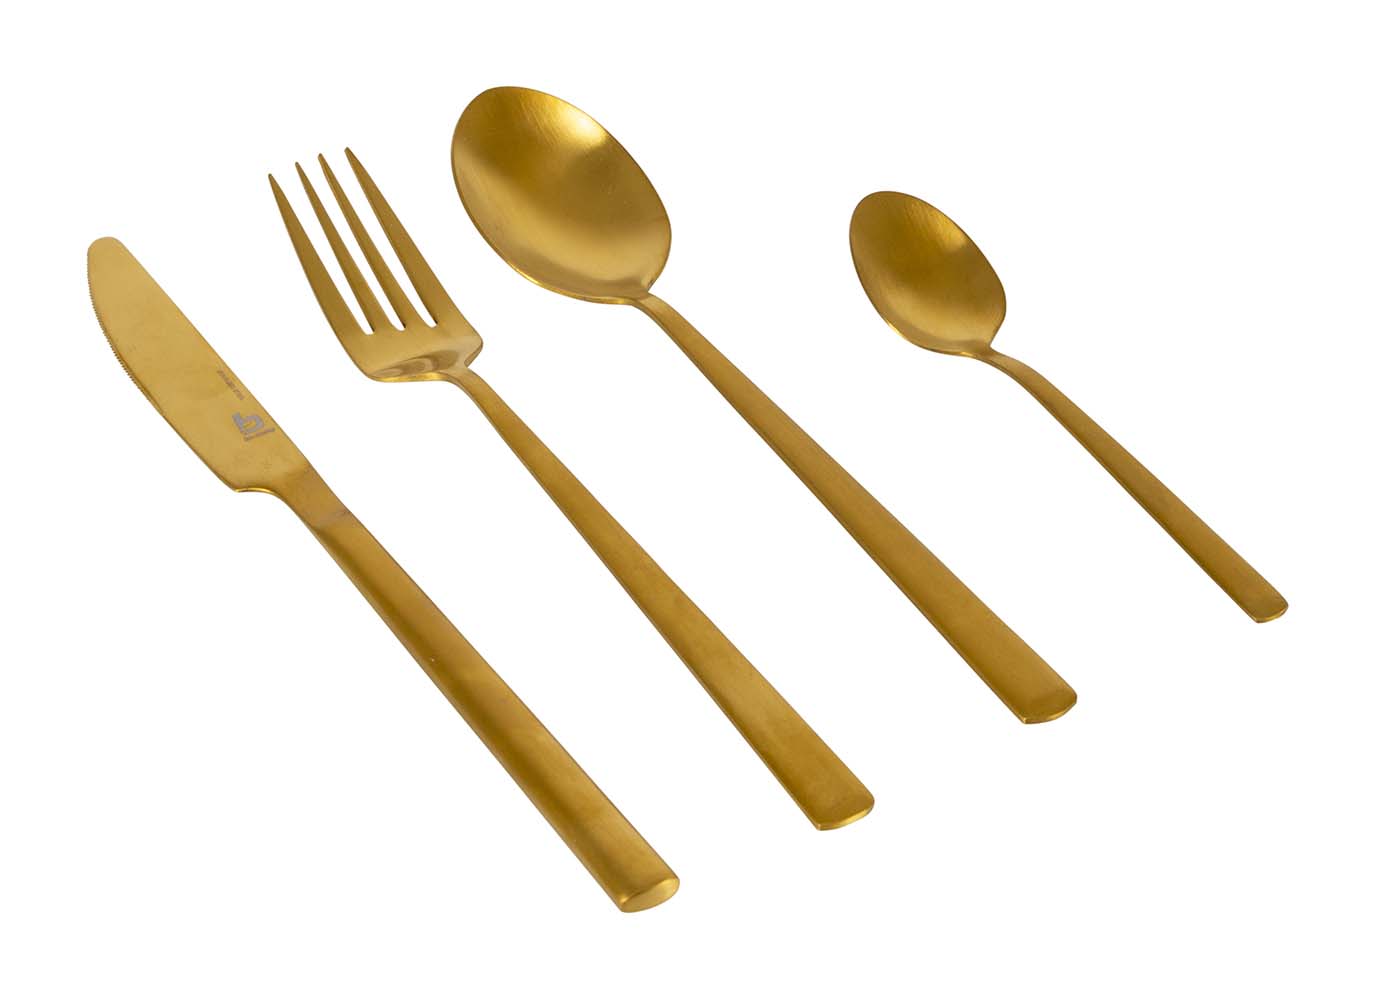 6102151 Bo-Camp - Industrial collection - Cutlery set - Fairbanks - 16 Pieces - 4 Persons - Gold